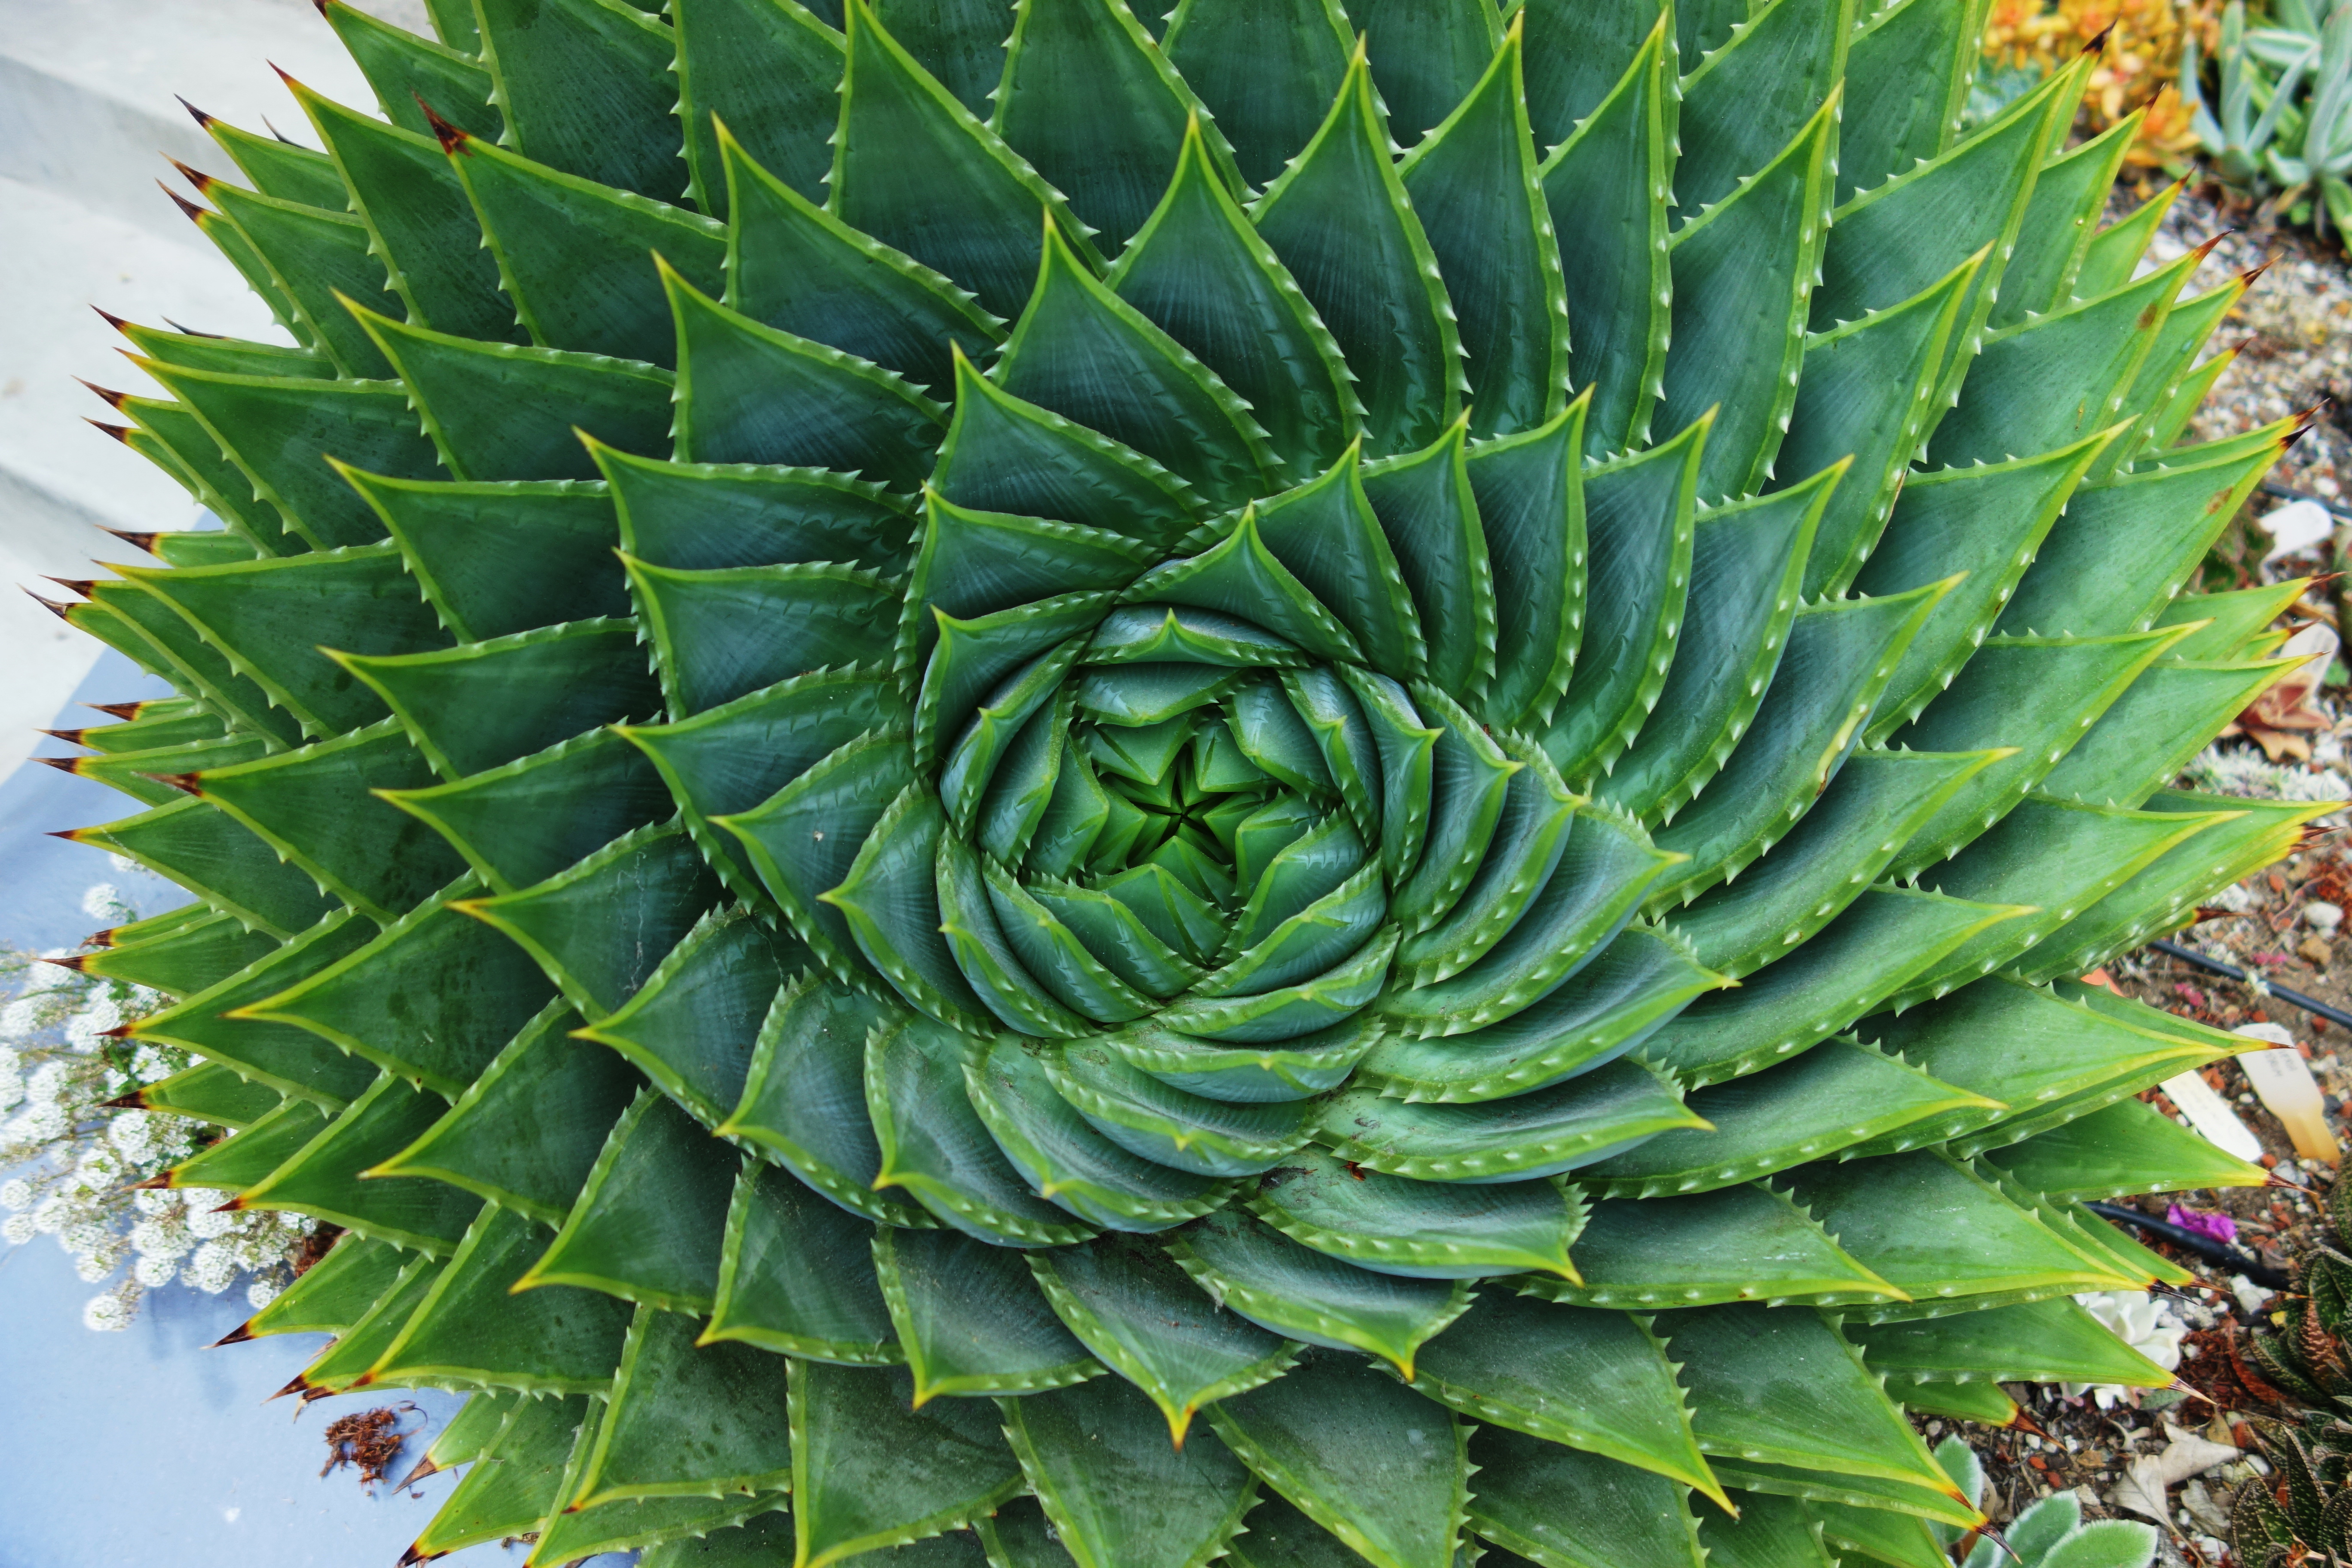 https://upload.wikimedia.org/wikipedia/commons/5/5a/Spiral_Aloe_from_above.JPG